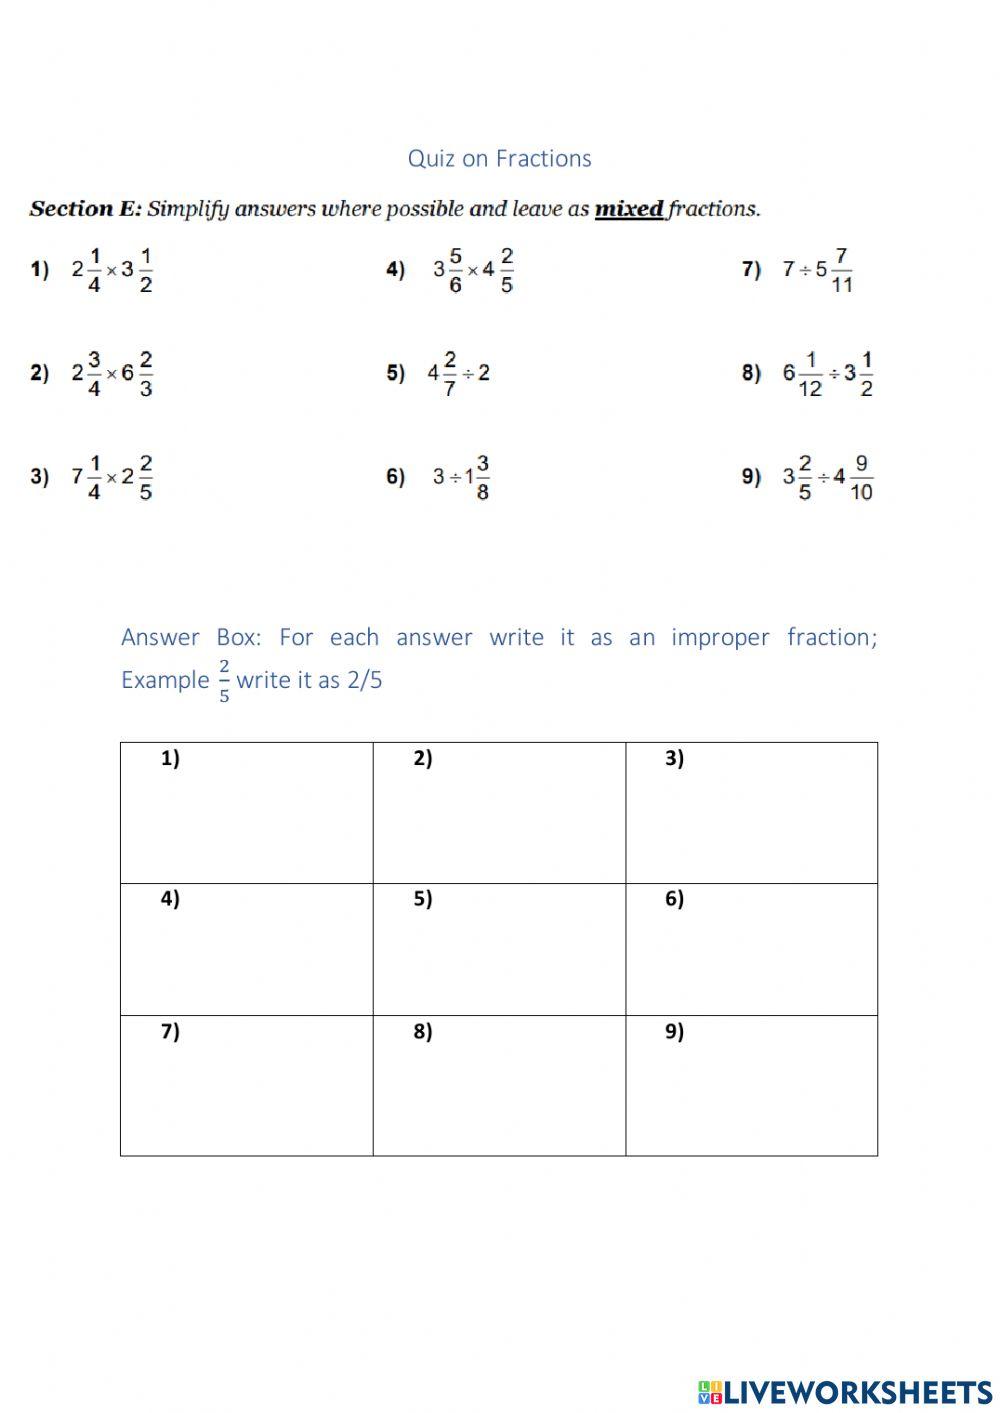 Quiz of Fractions Section D